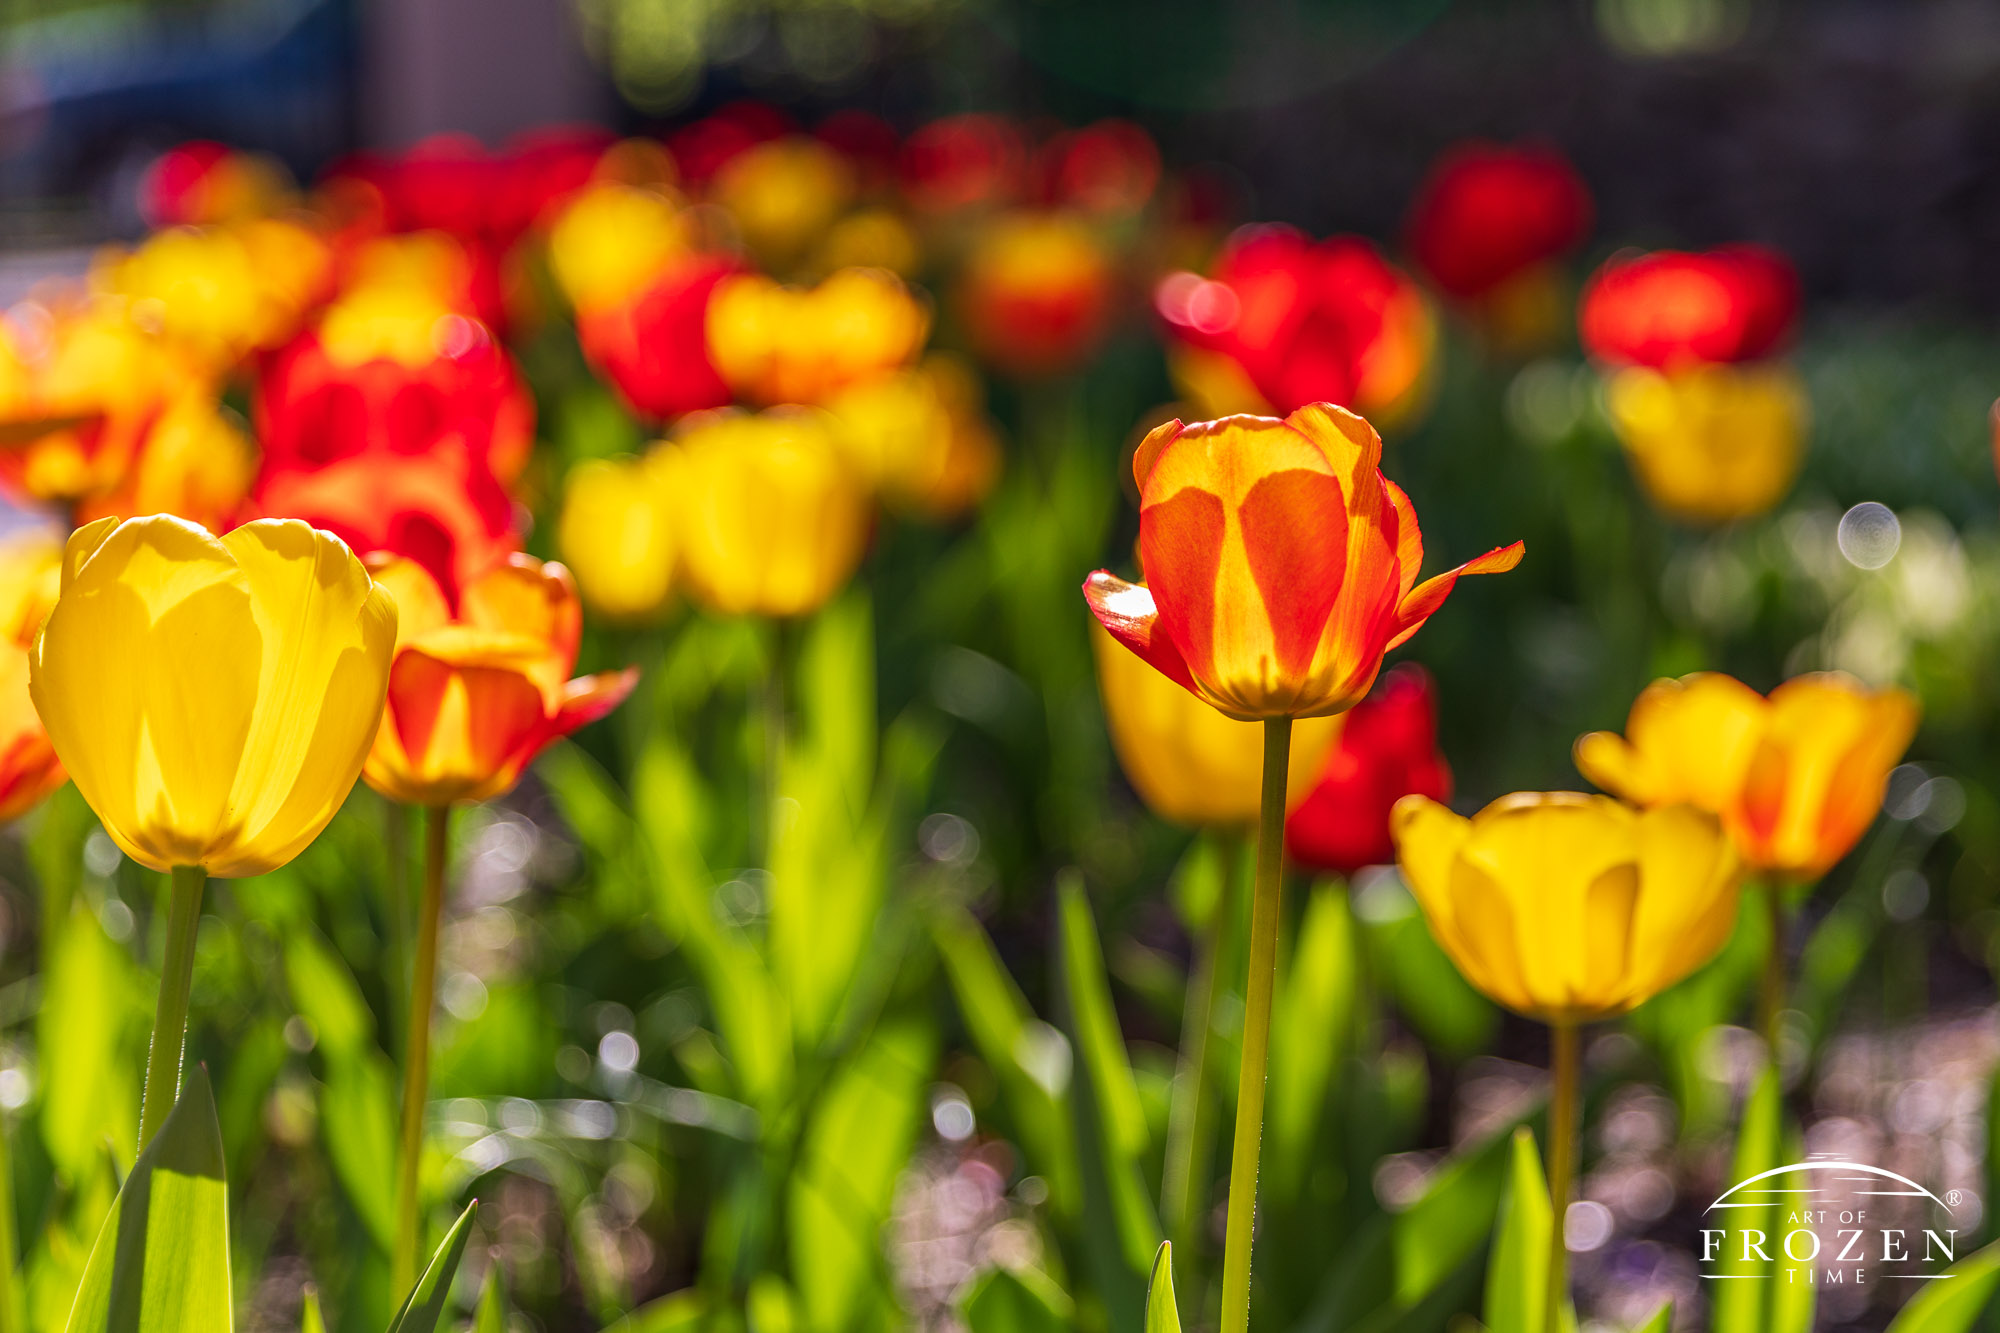 An intimate view of a tulip flowerbed where the sun backlights the red and yellow tulip petals